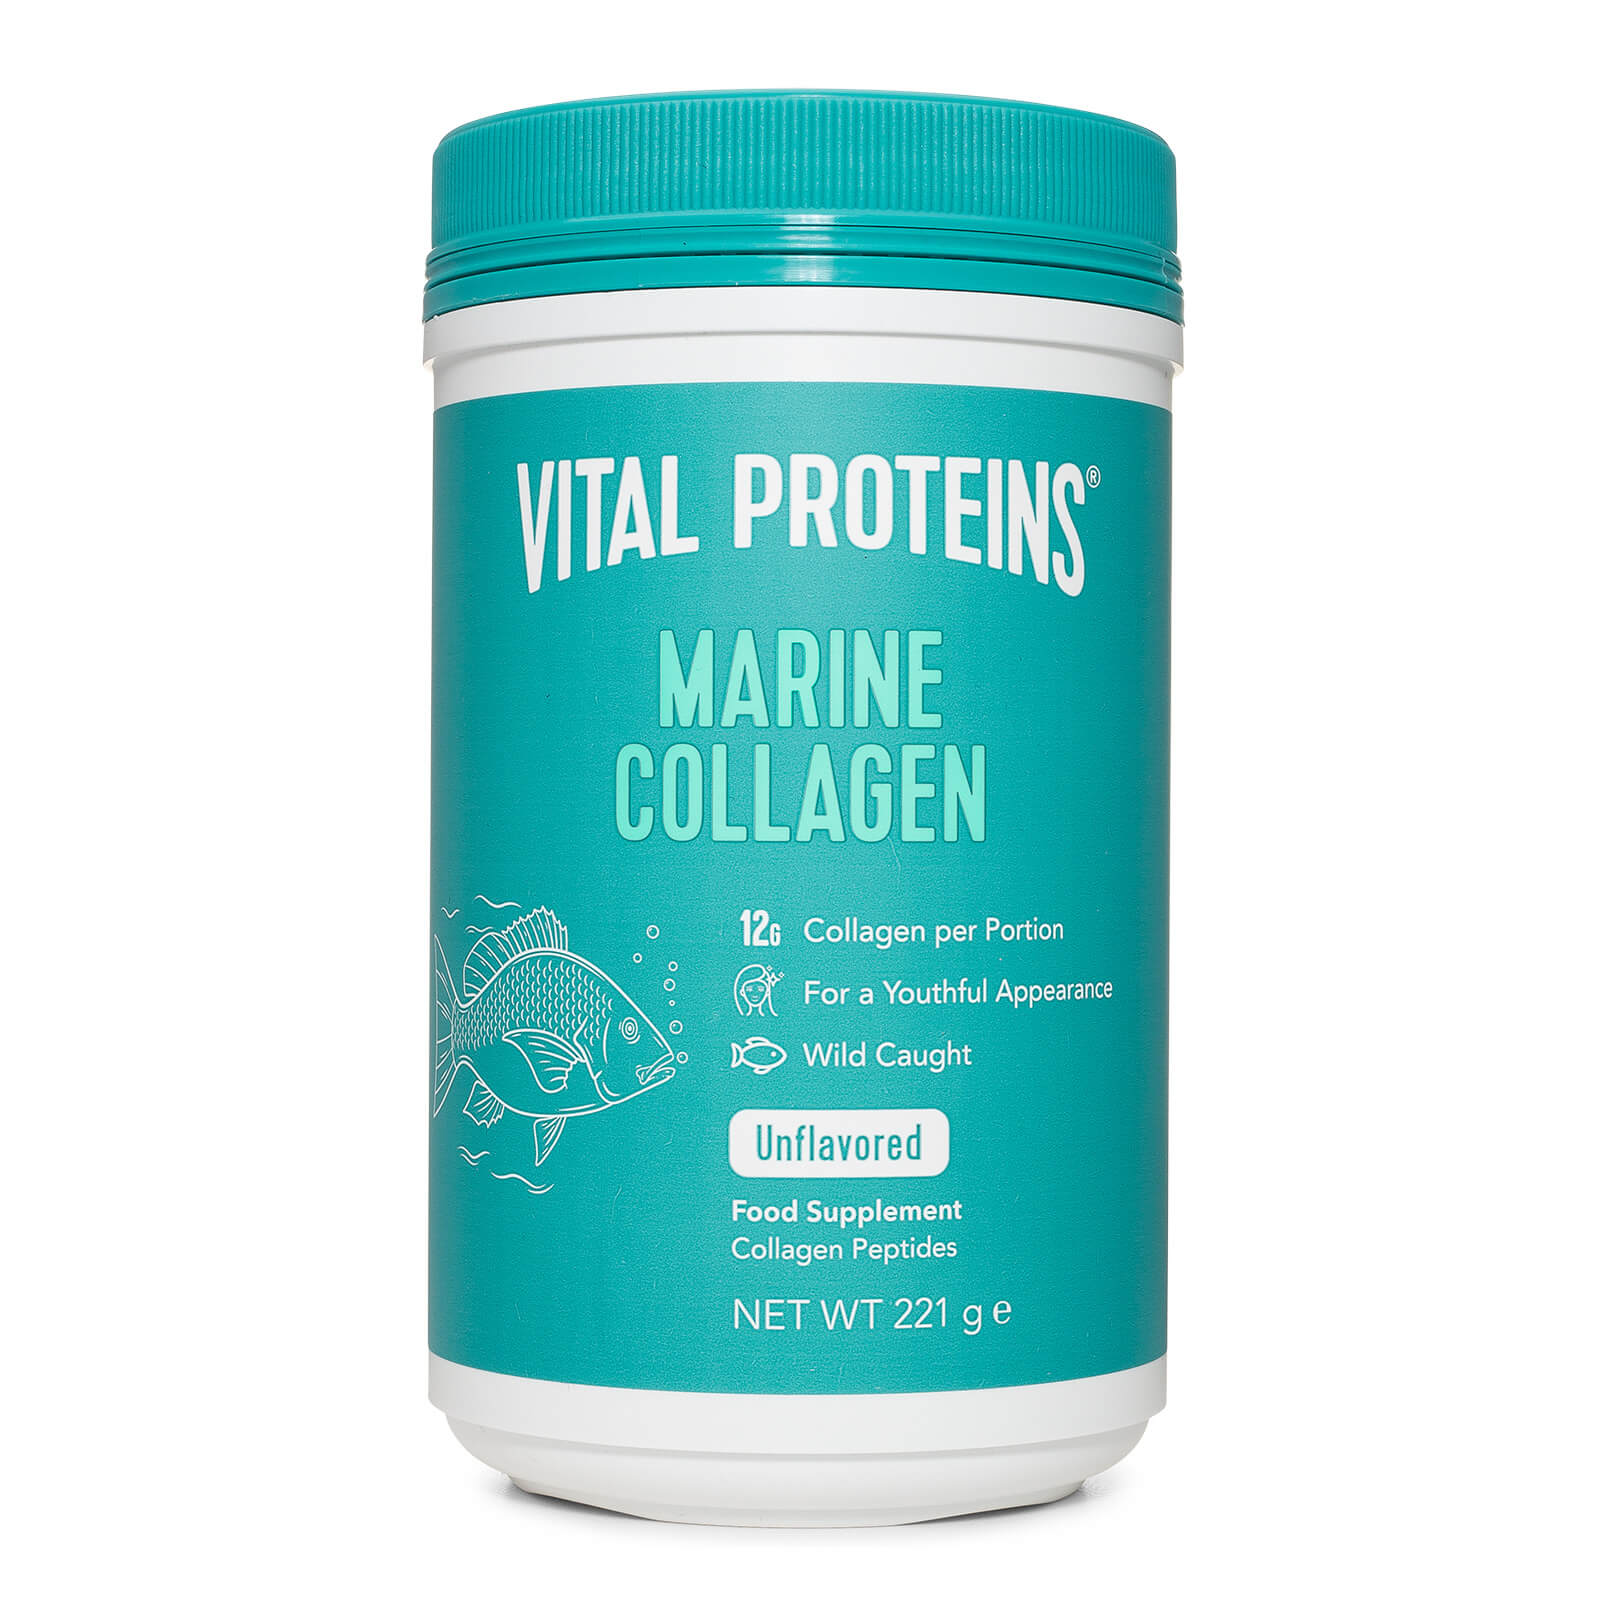 Marine Collagen - 7oz Subscription - Delivery Every 3 Months